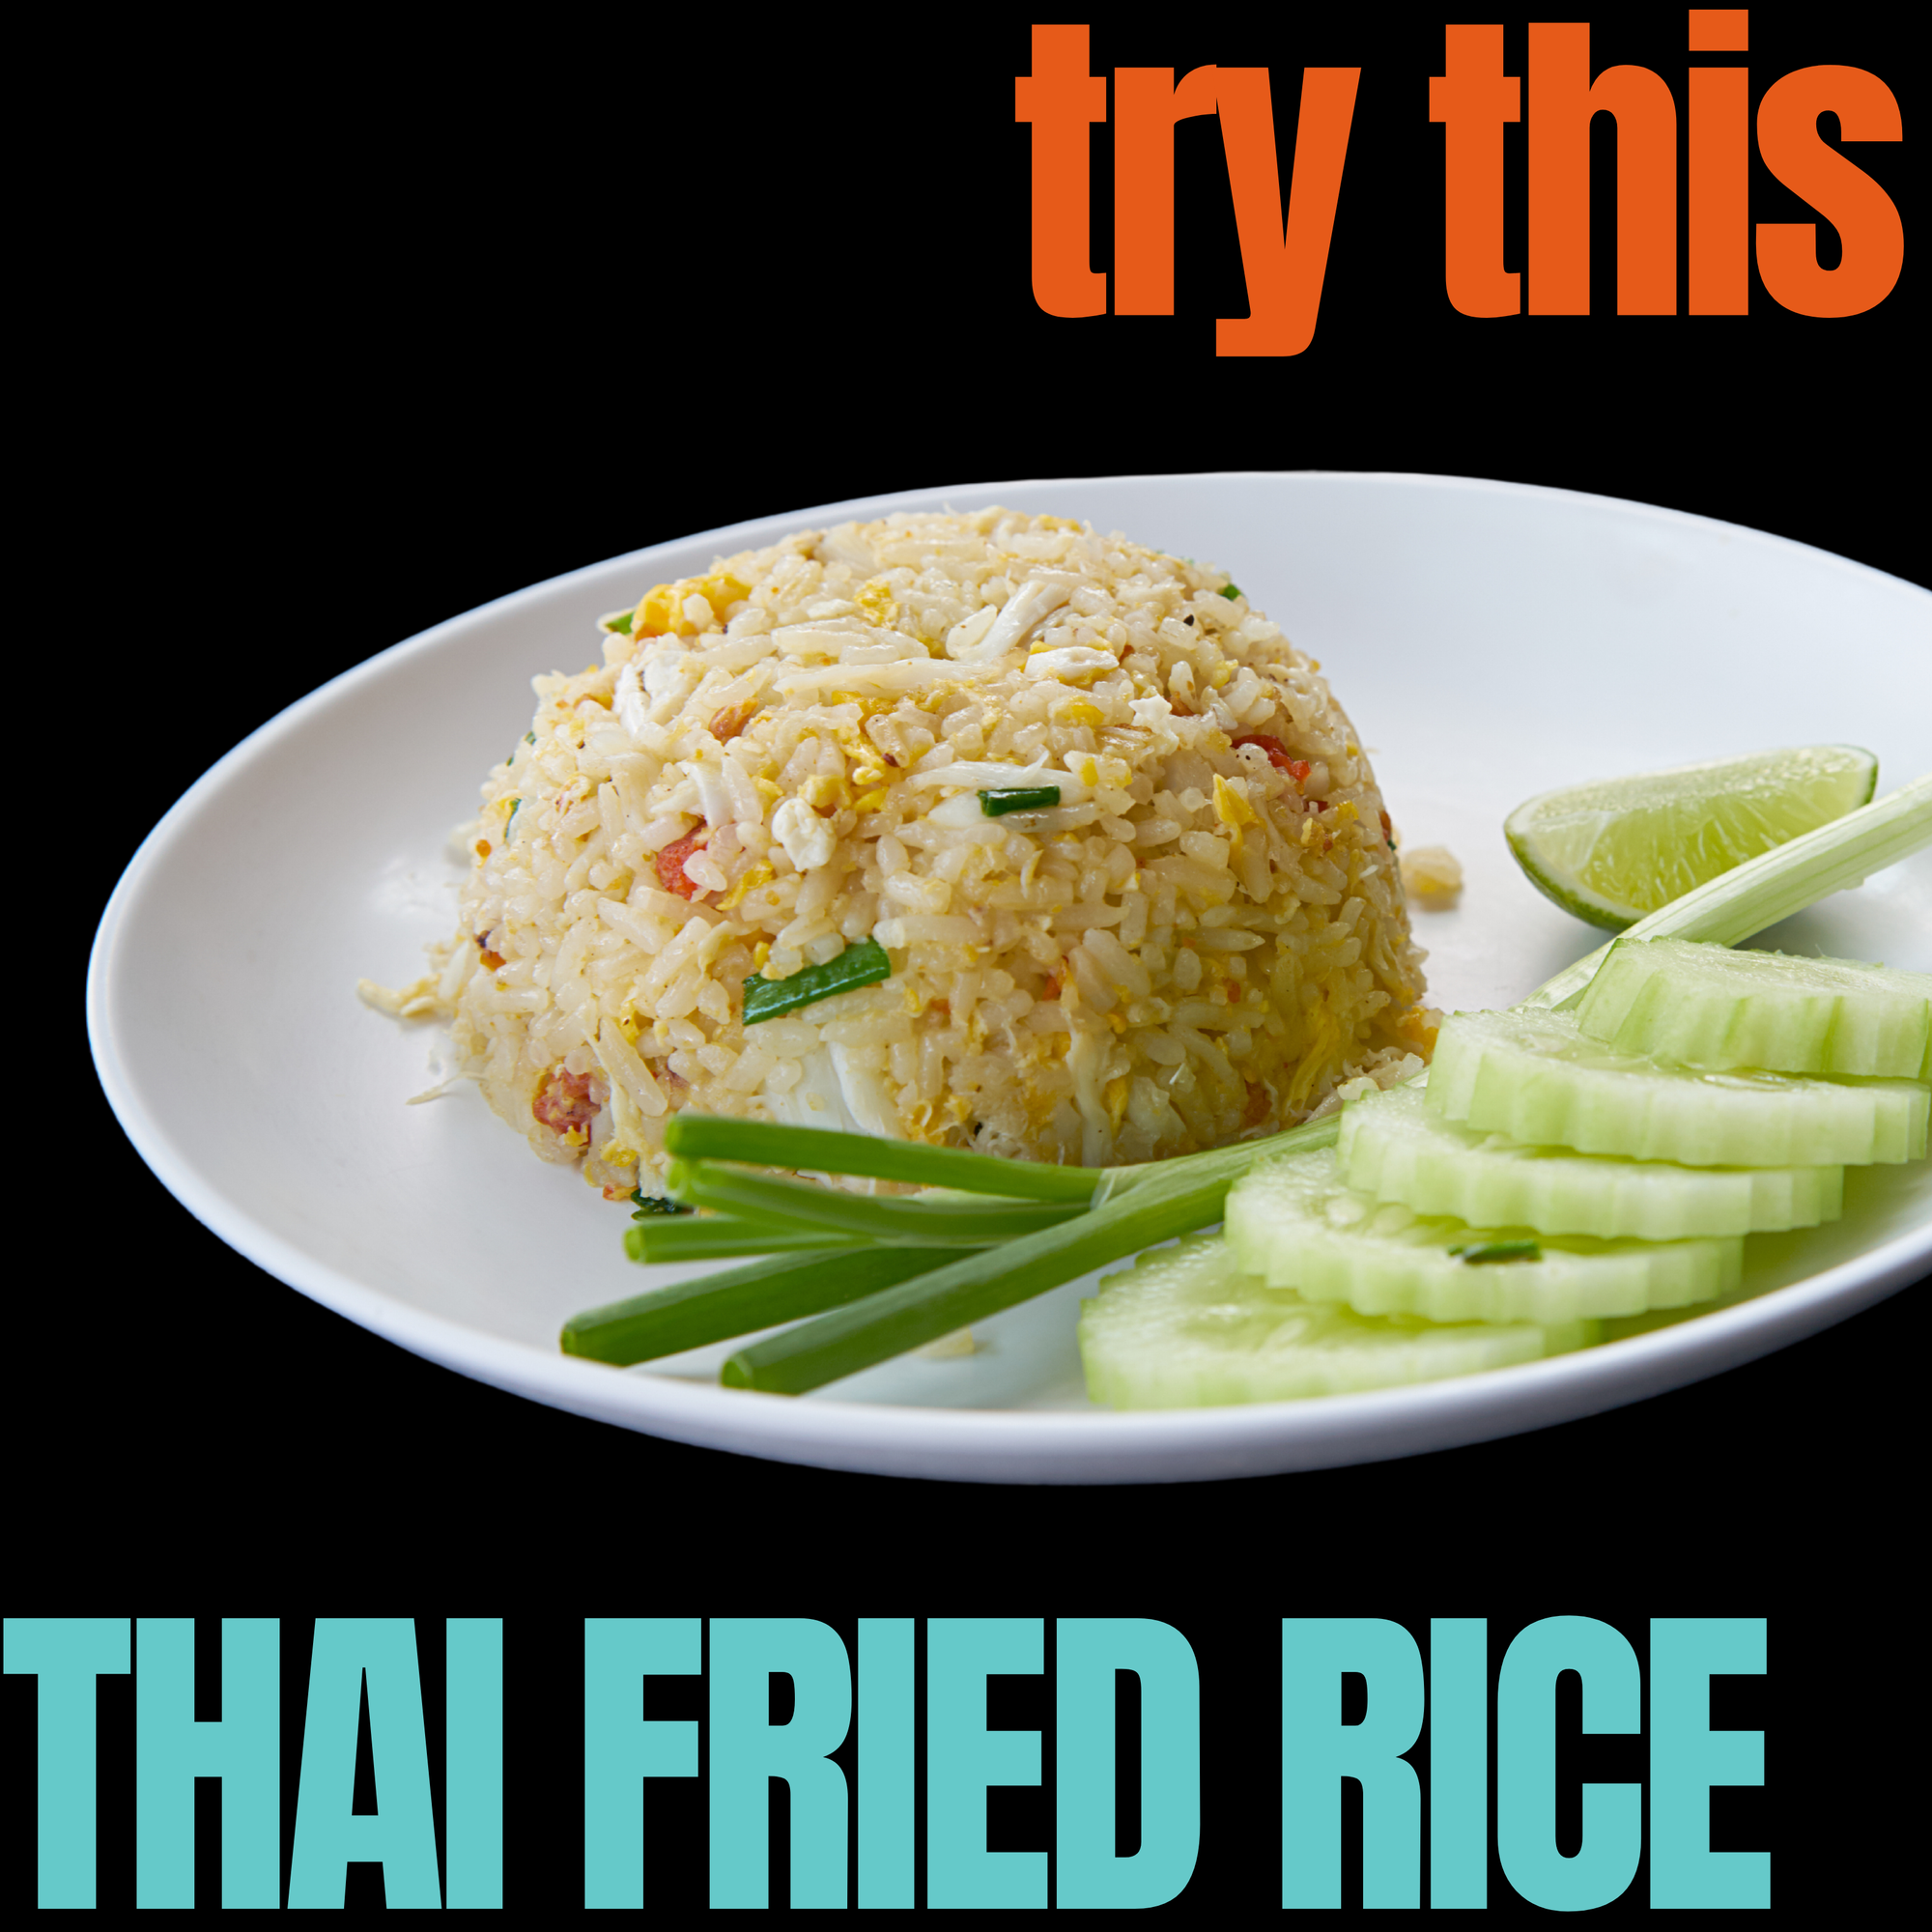 TRY THIS - THAI FRIED RICE